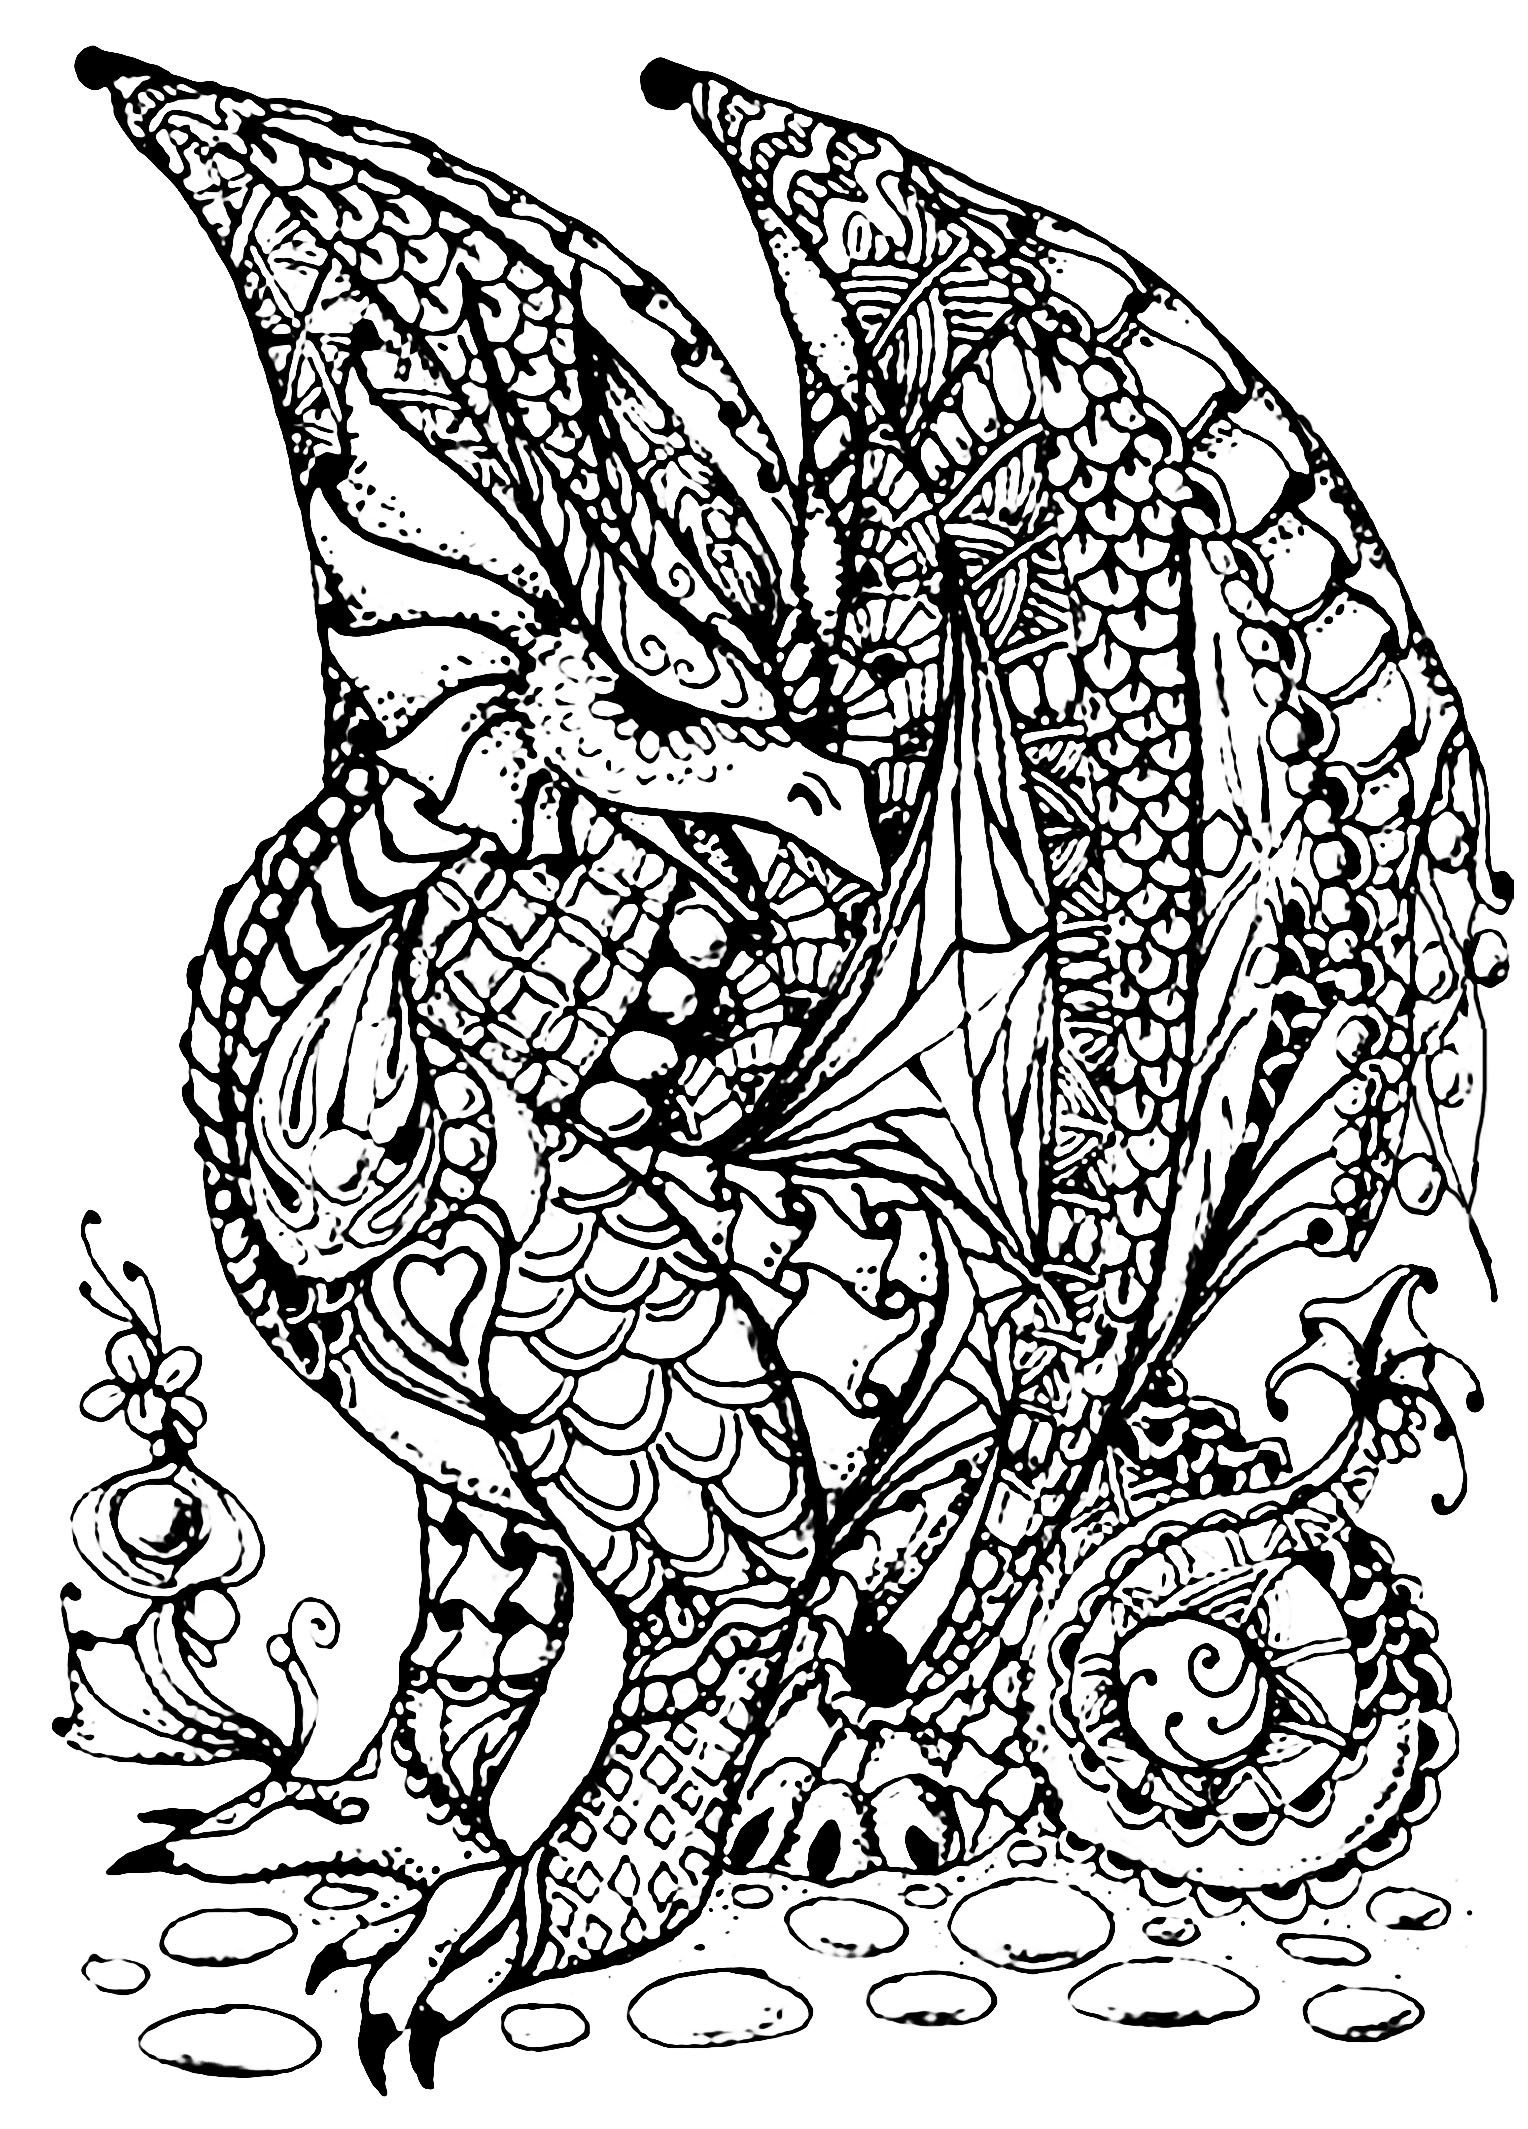 Download Dragon full of scales | Myths & legends - Coloring pages ...